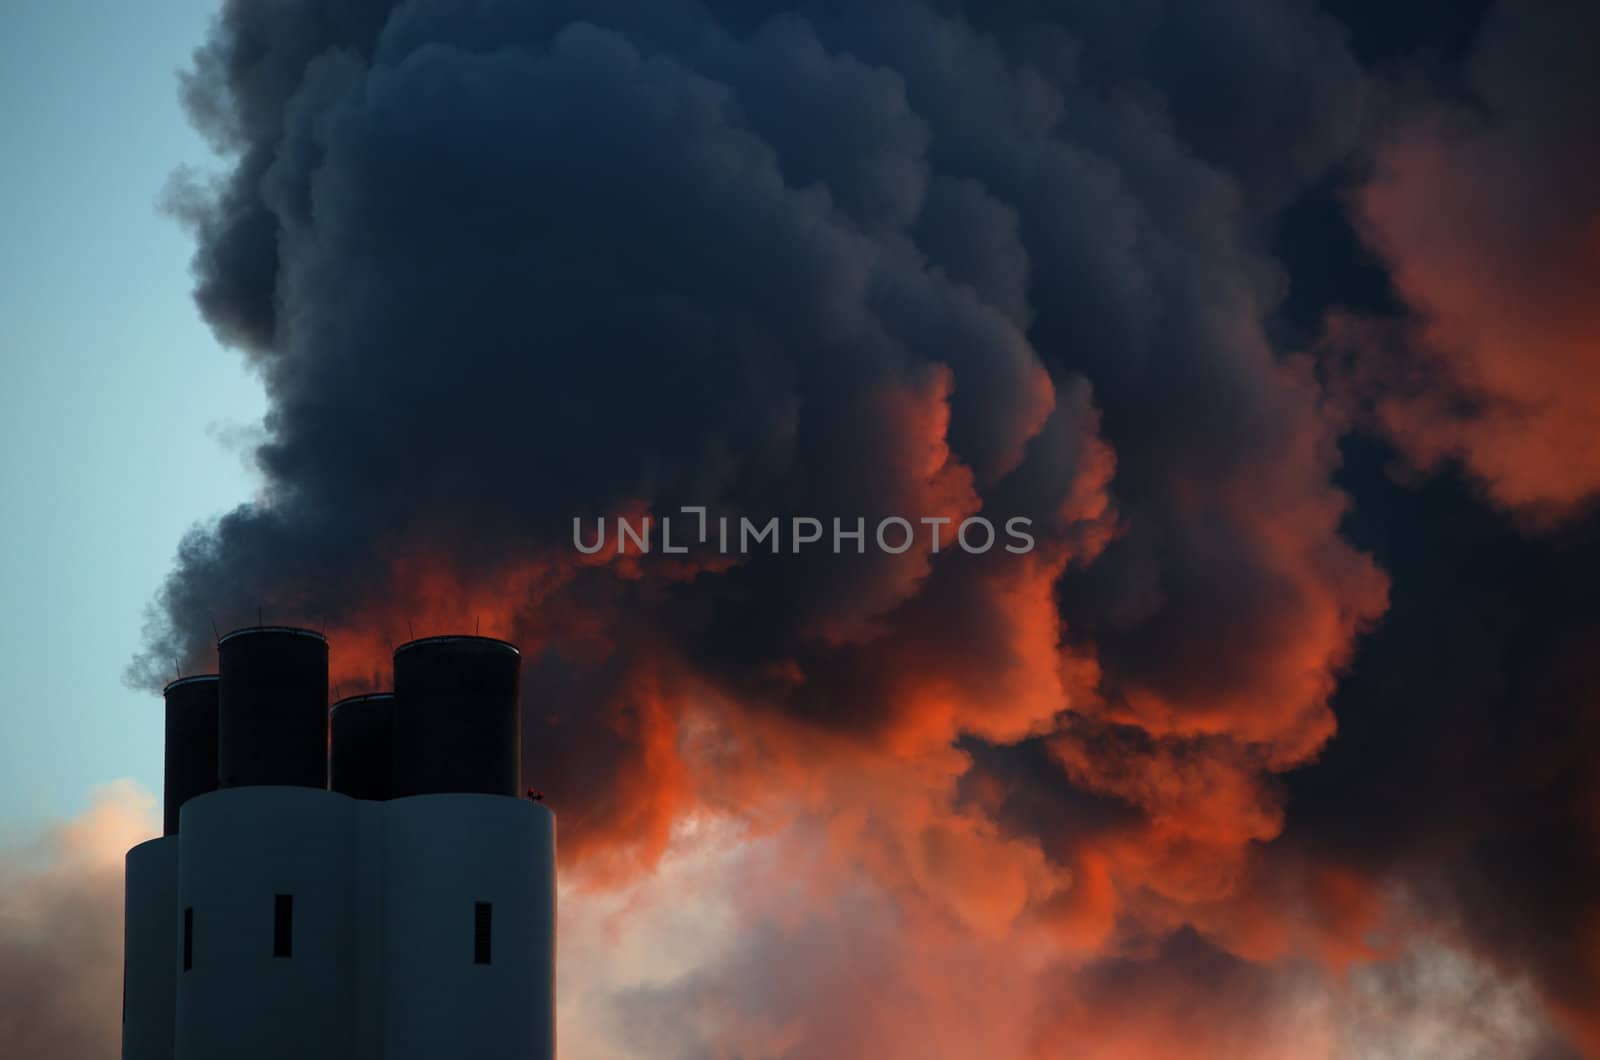 Pollution concept of smoking chimney. The setting sun illuminates the vapor from below, giving it an ominous impression, like that of volcano smoke.